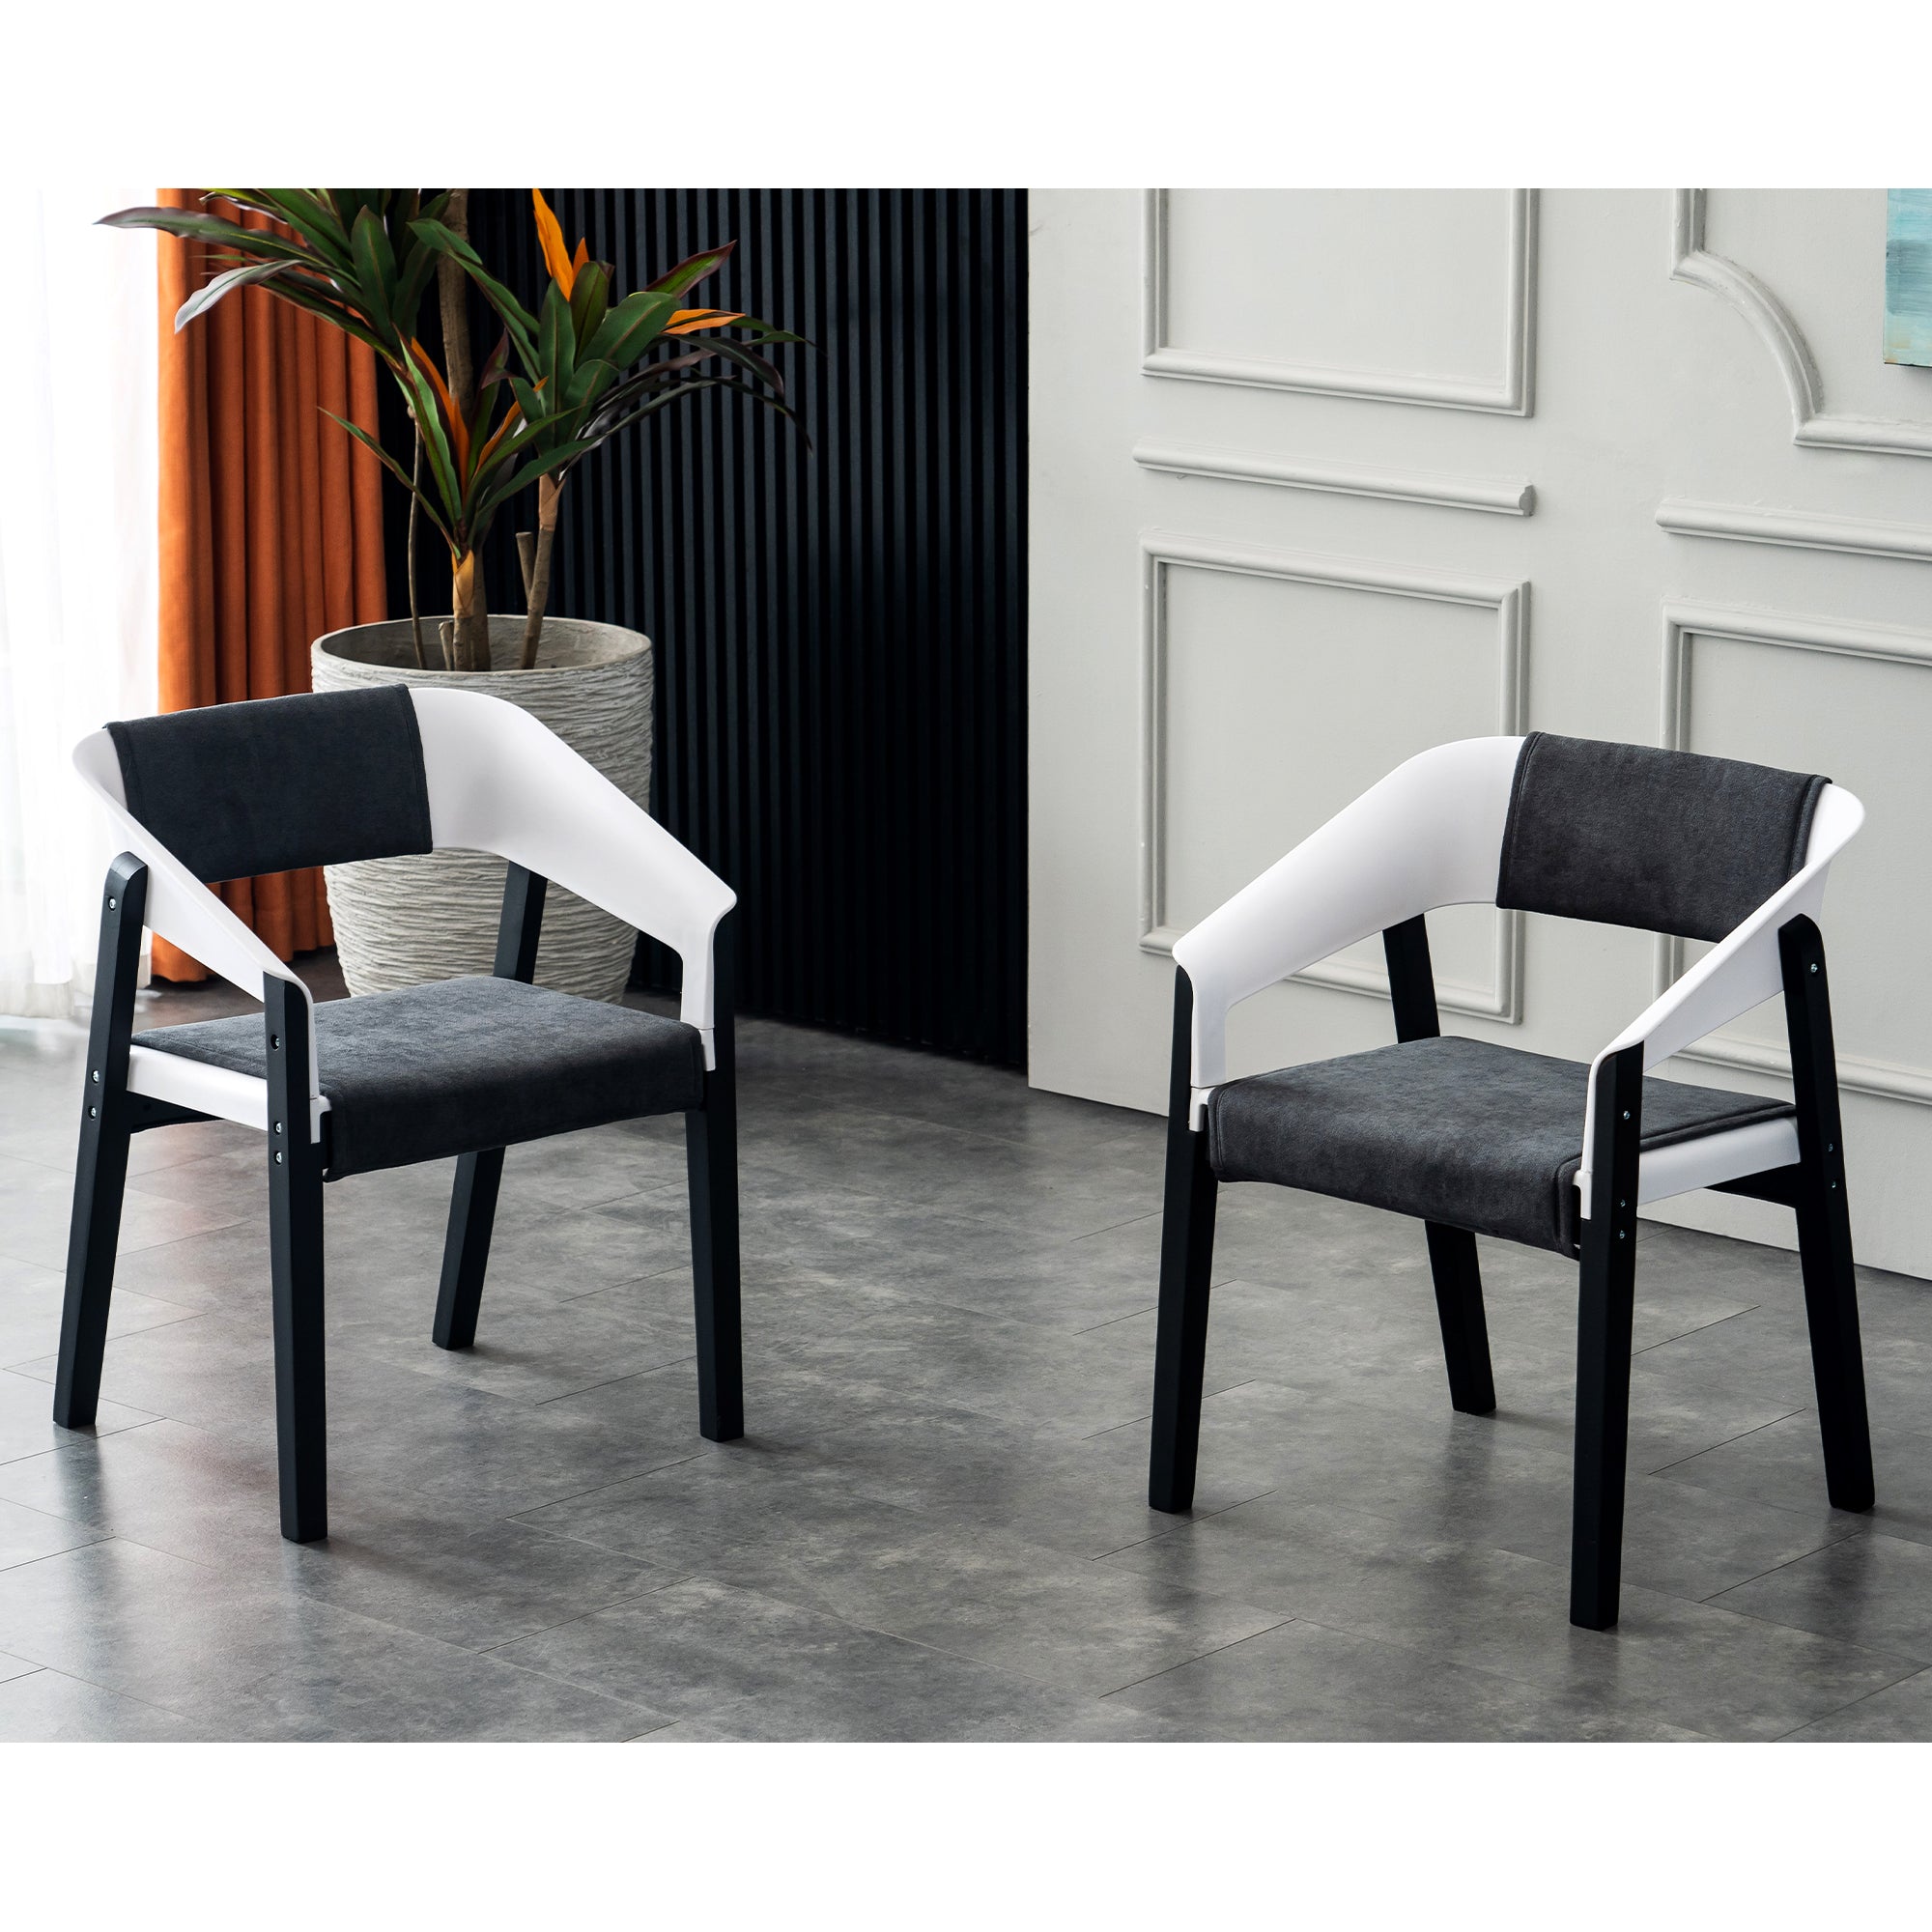 Ivinta Black Outdoor Dining Chair with Padded Cushion, Mid Century Modern Dining Chairs Set of 2,